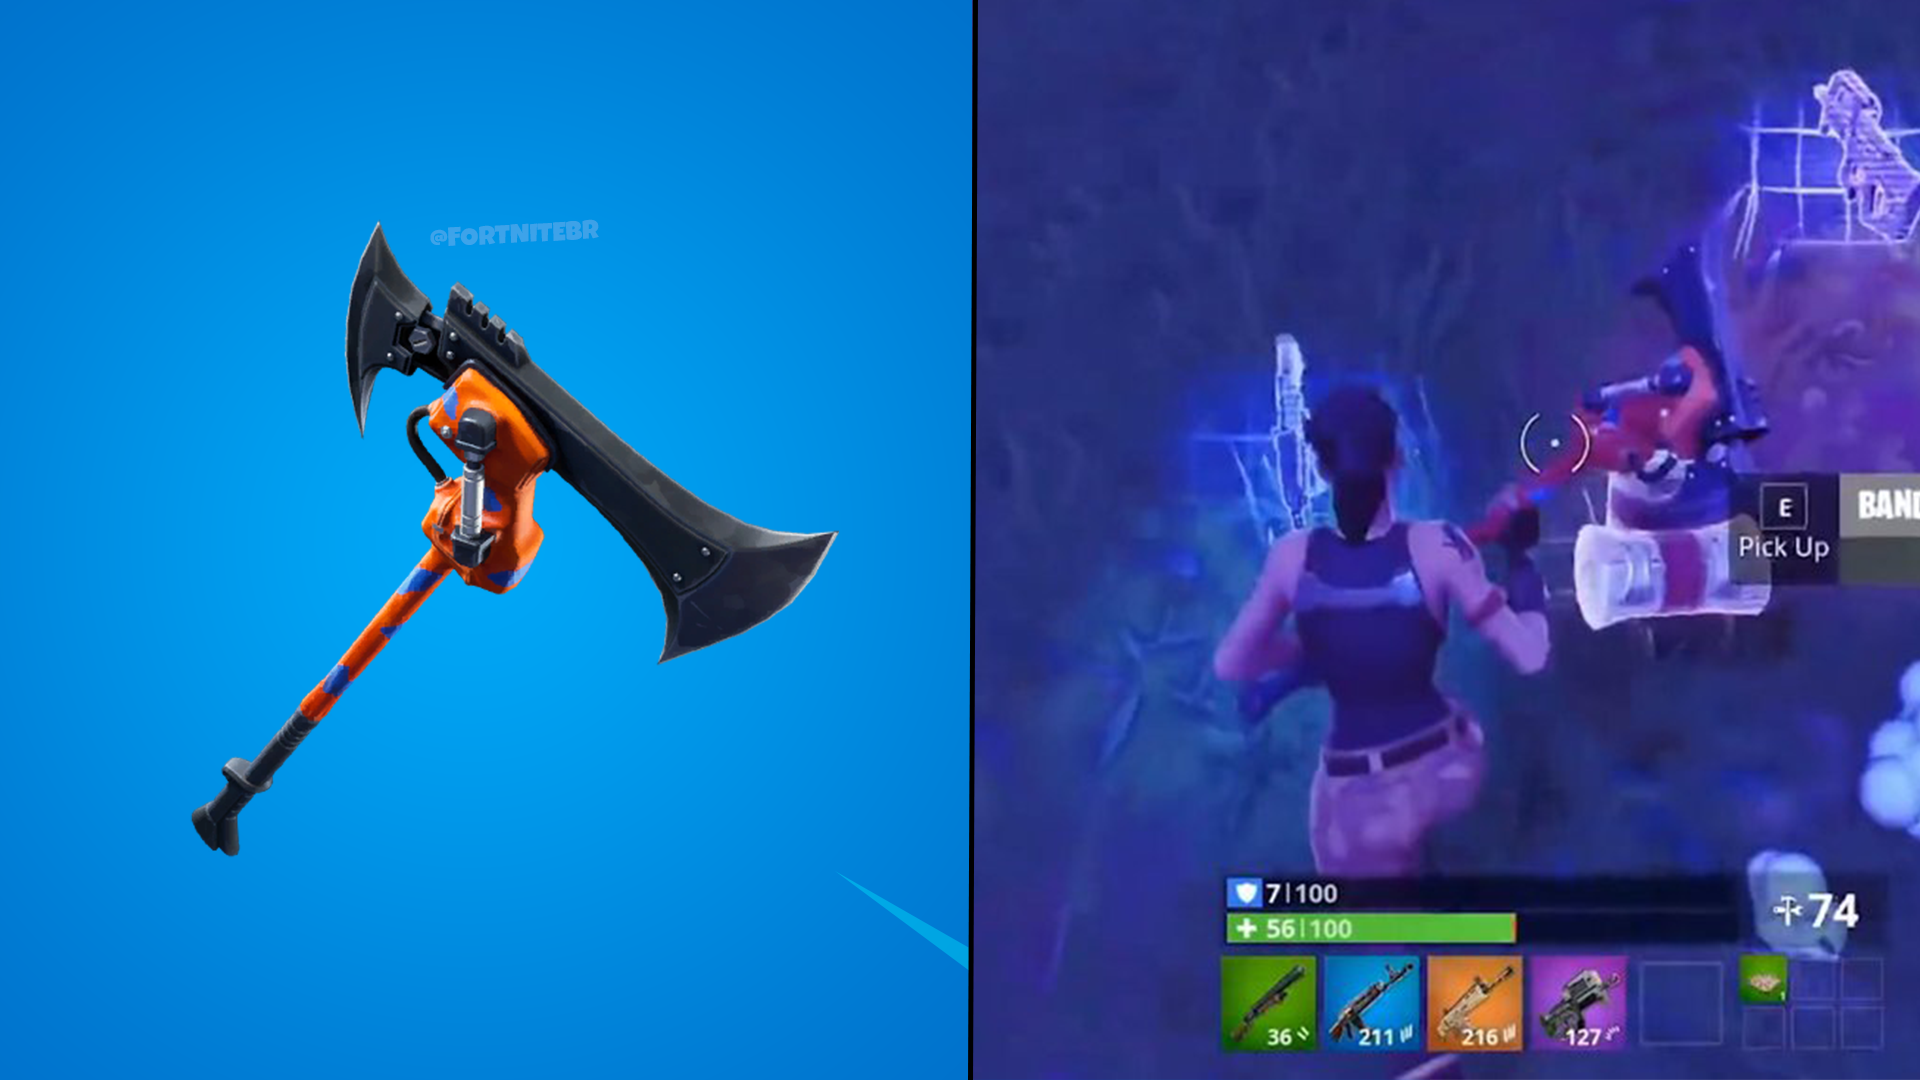 Many Unreleased Fortnite Cosmetics Are Being Used At The Esl - brute force pickaxe